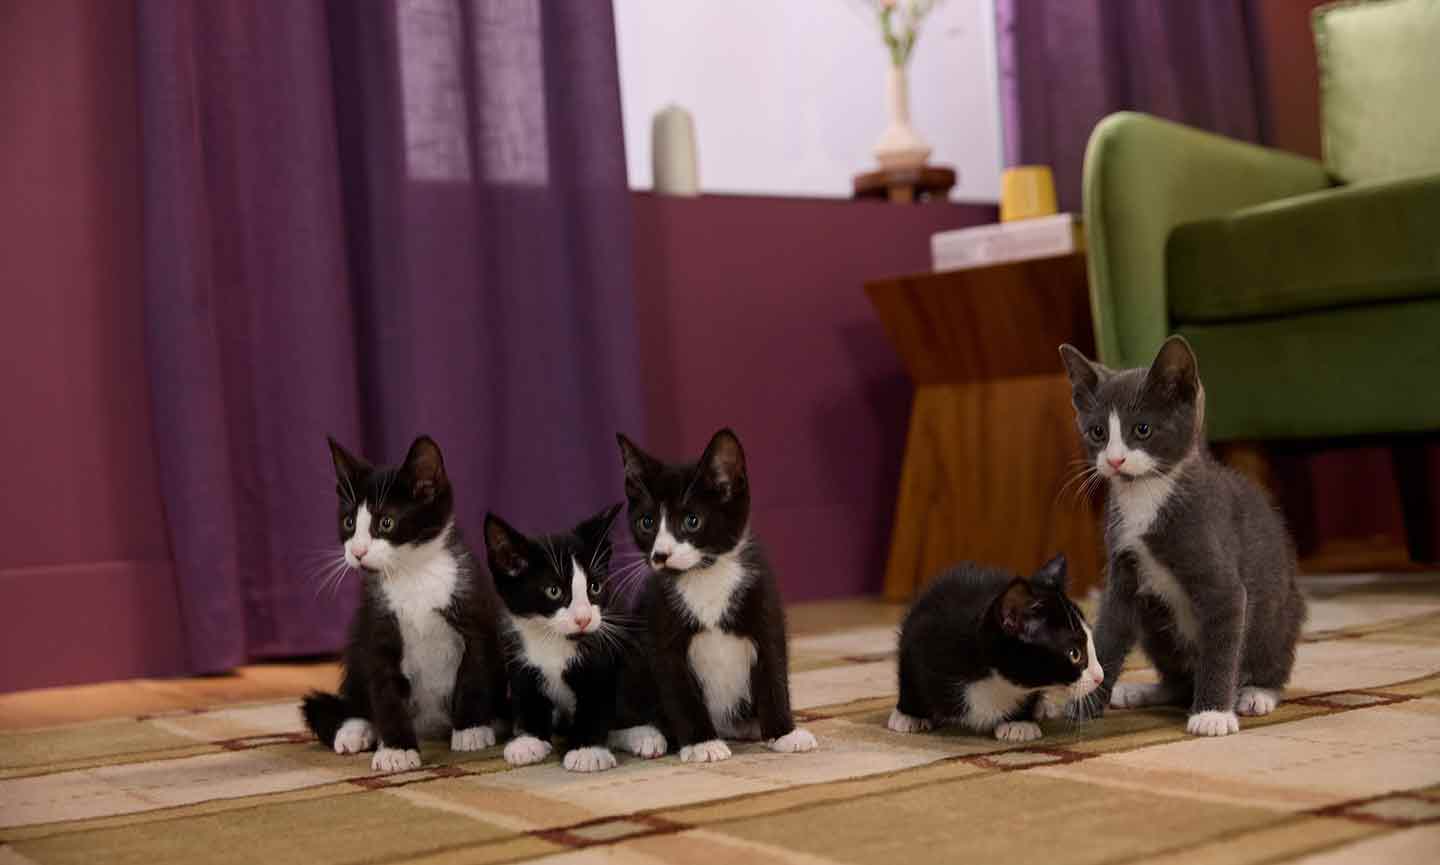 A group of kittens together in a living room